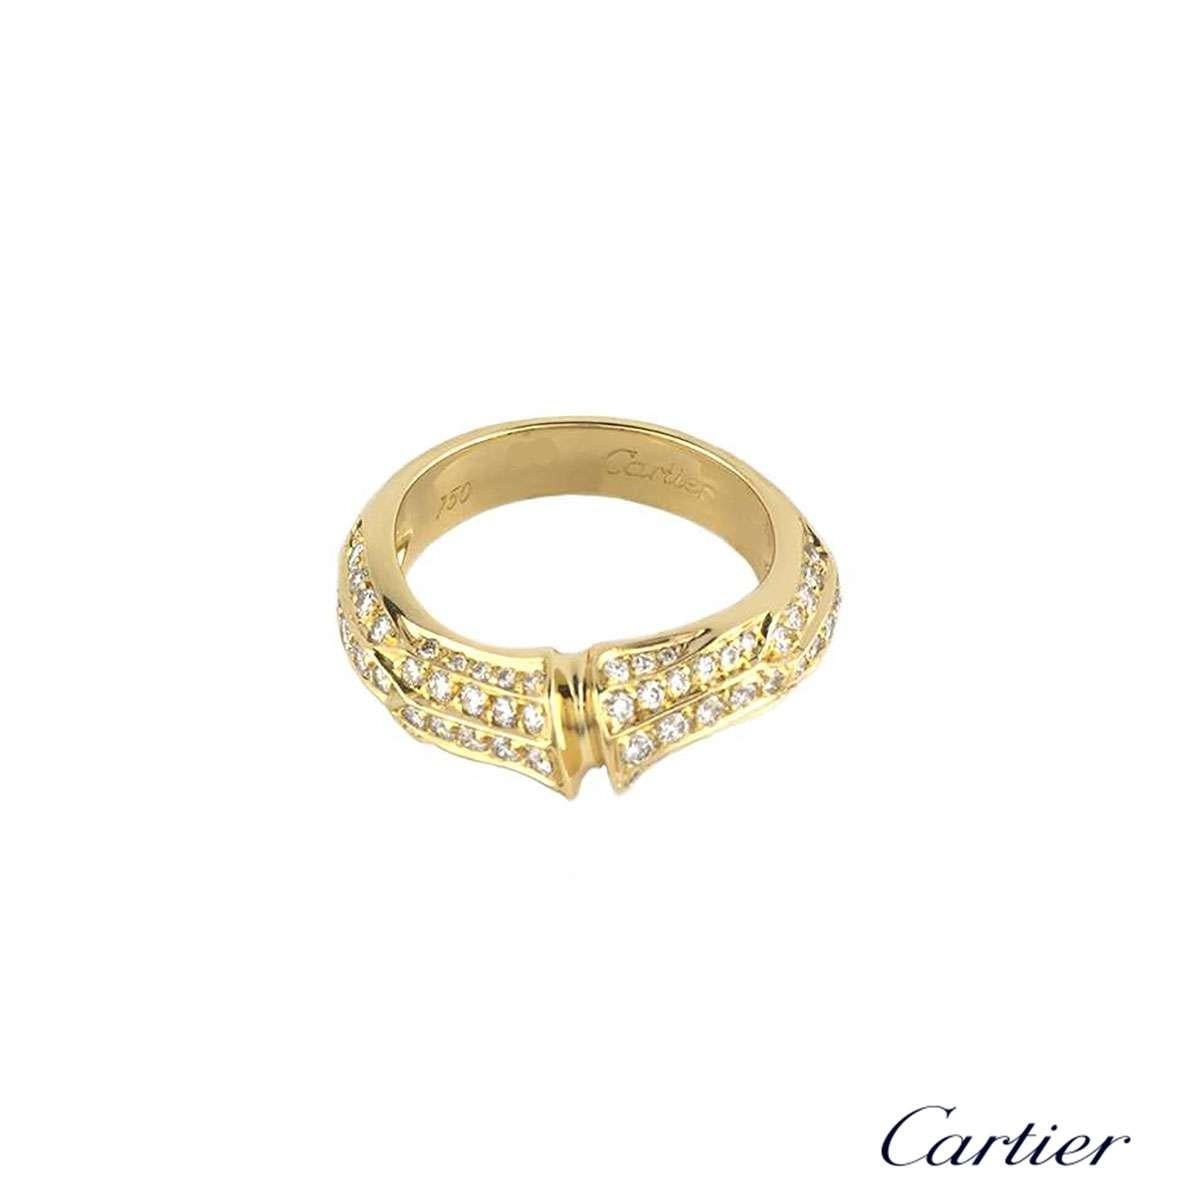 A stylish 18k yellow gold diamond set ring from the Cartier Bamboo collection. The ring is set to the front with a bamboo design, pave set with round brilliant cut diamonds totalling approximately 0.82ct, and is complemented by a brushed finish to